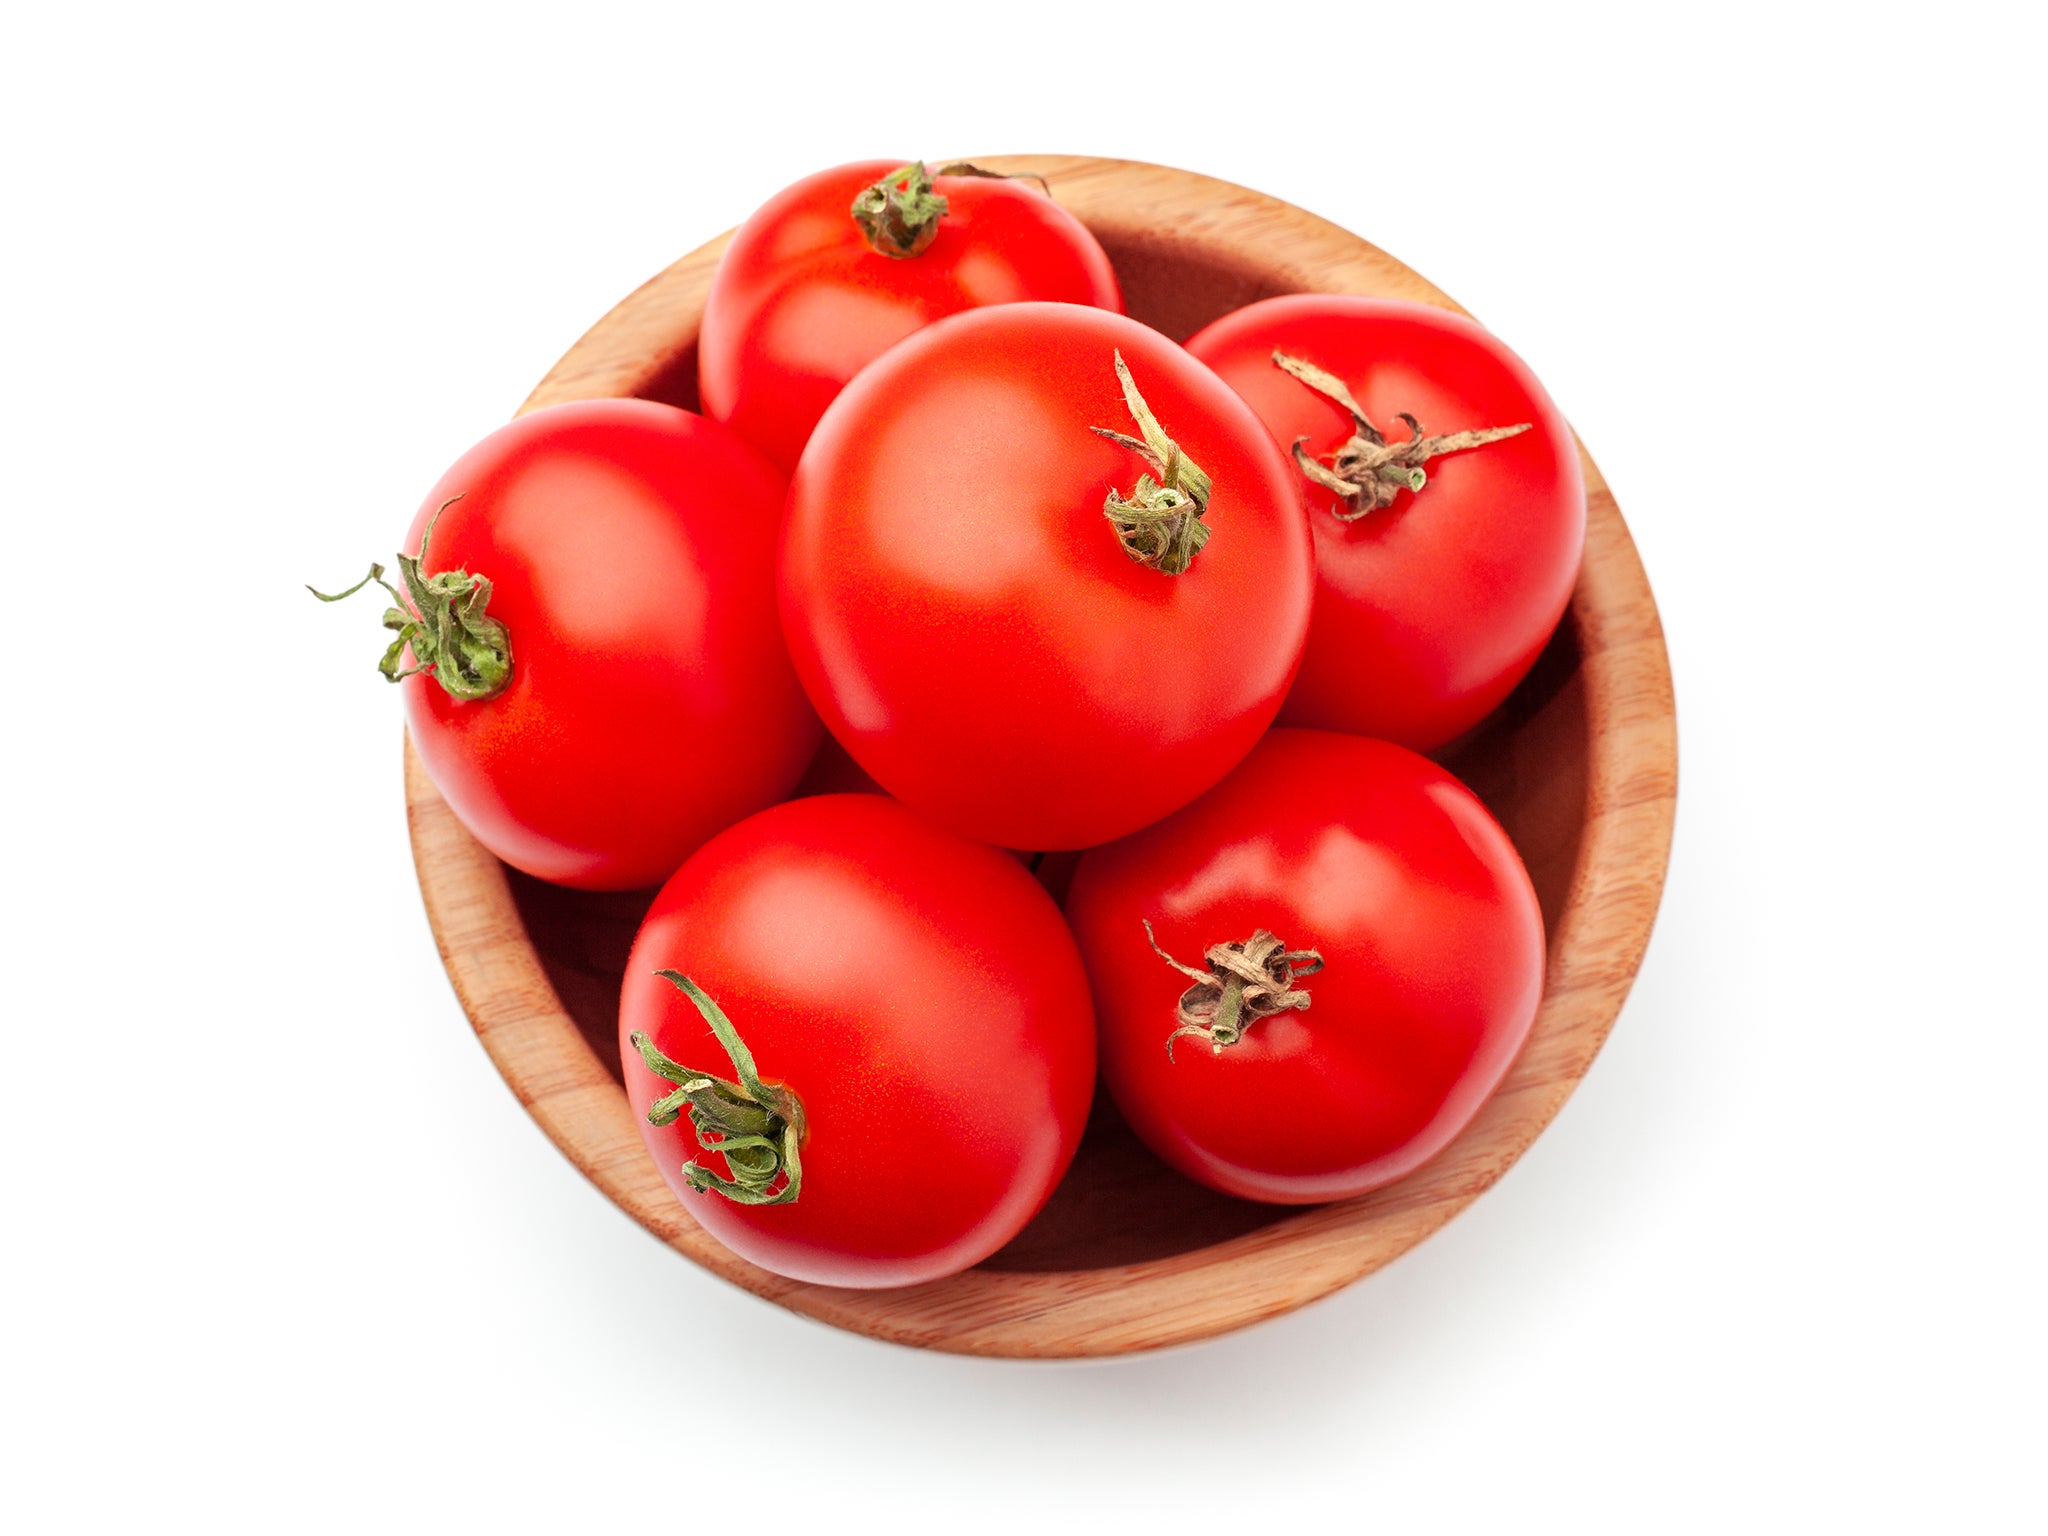 Tomatoes are best kept at room temperature, not the fridge